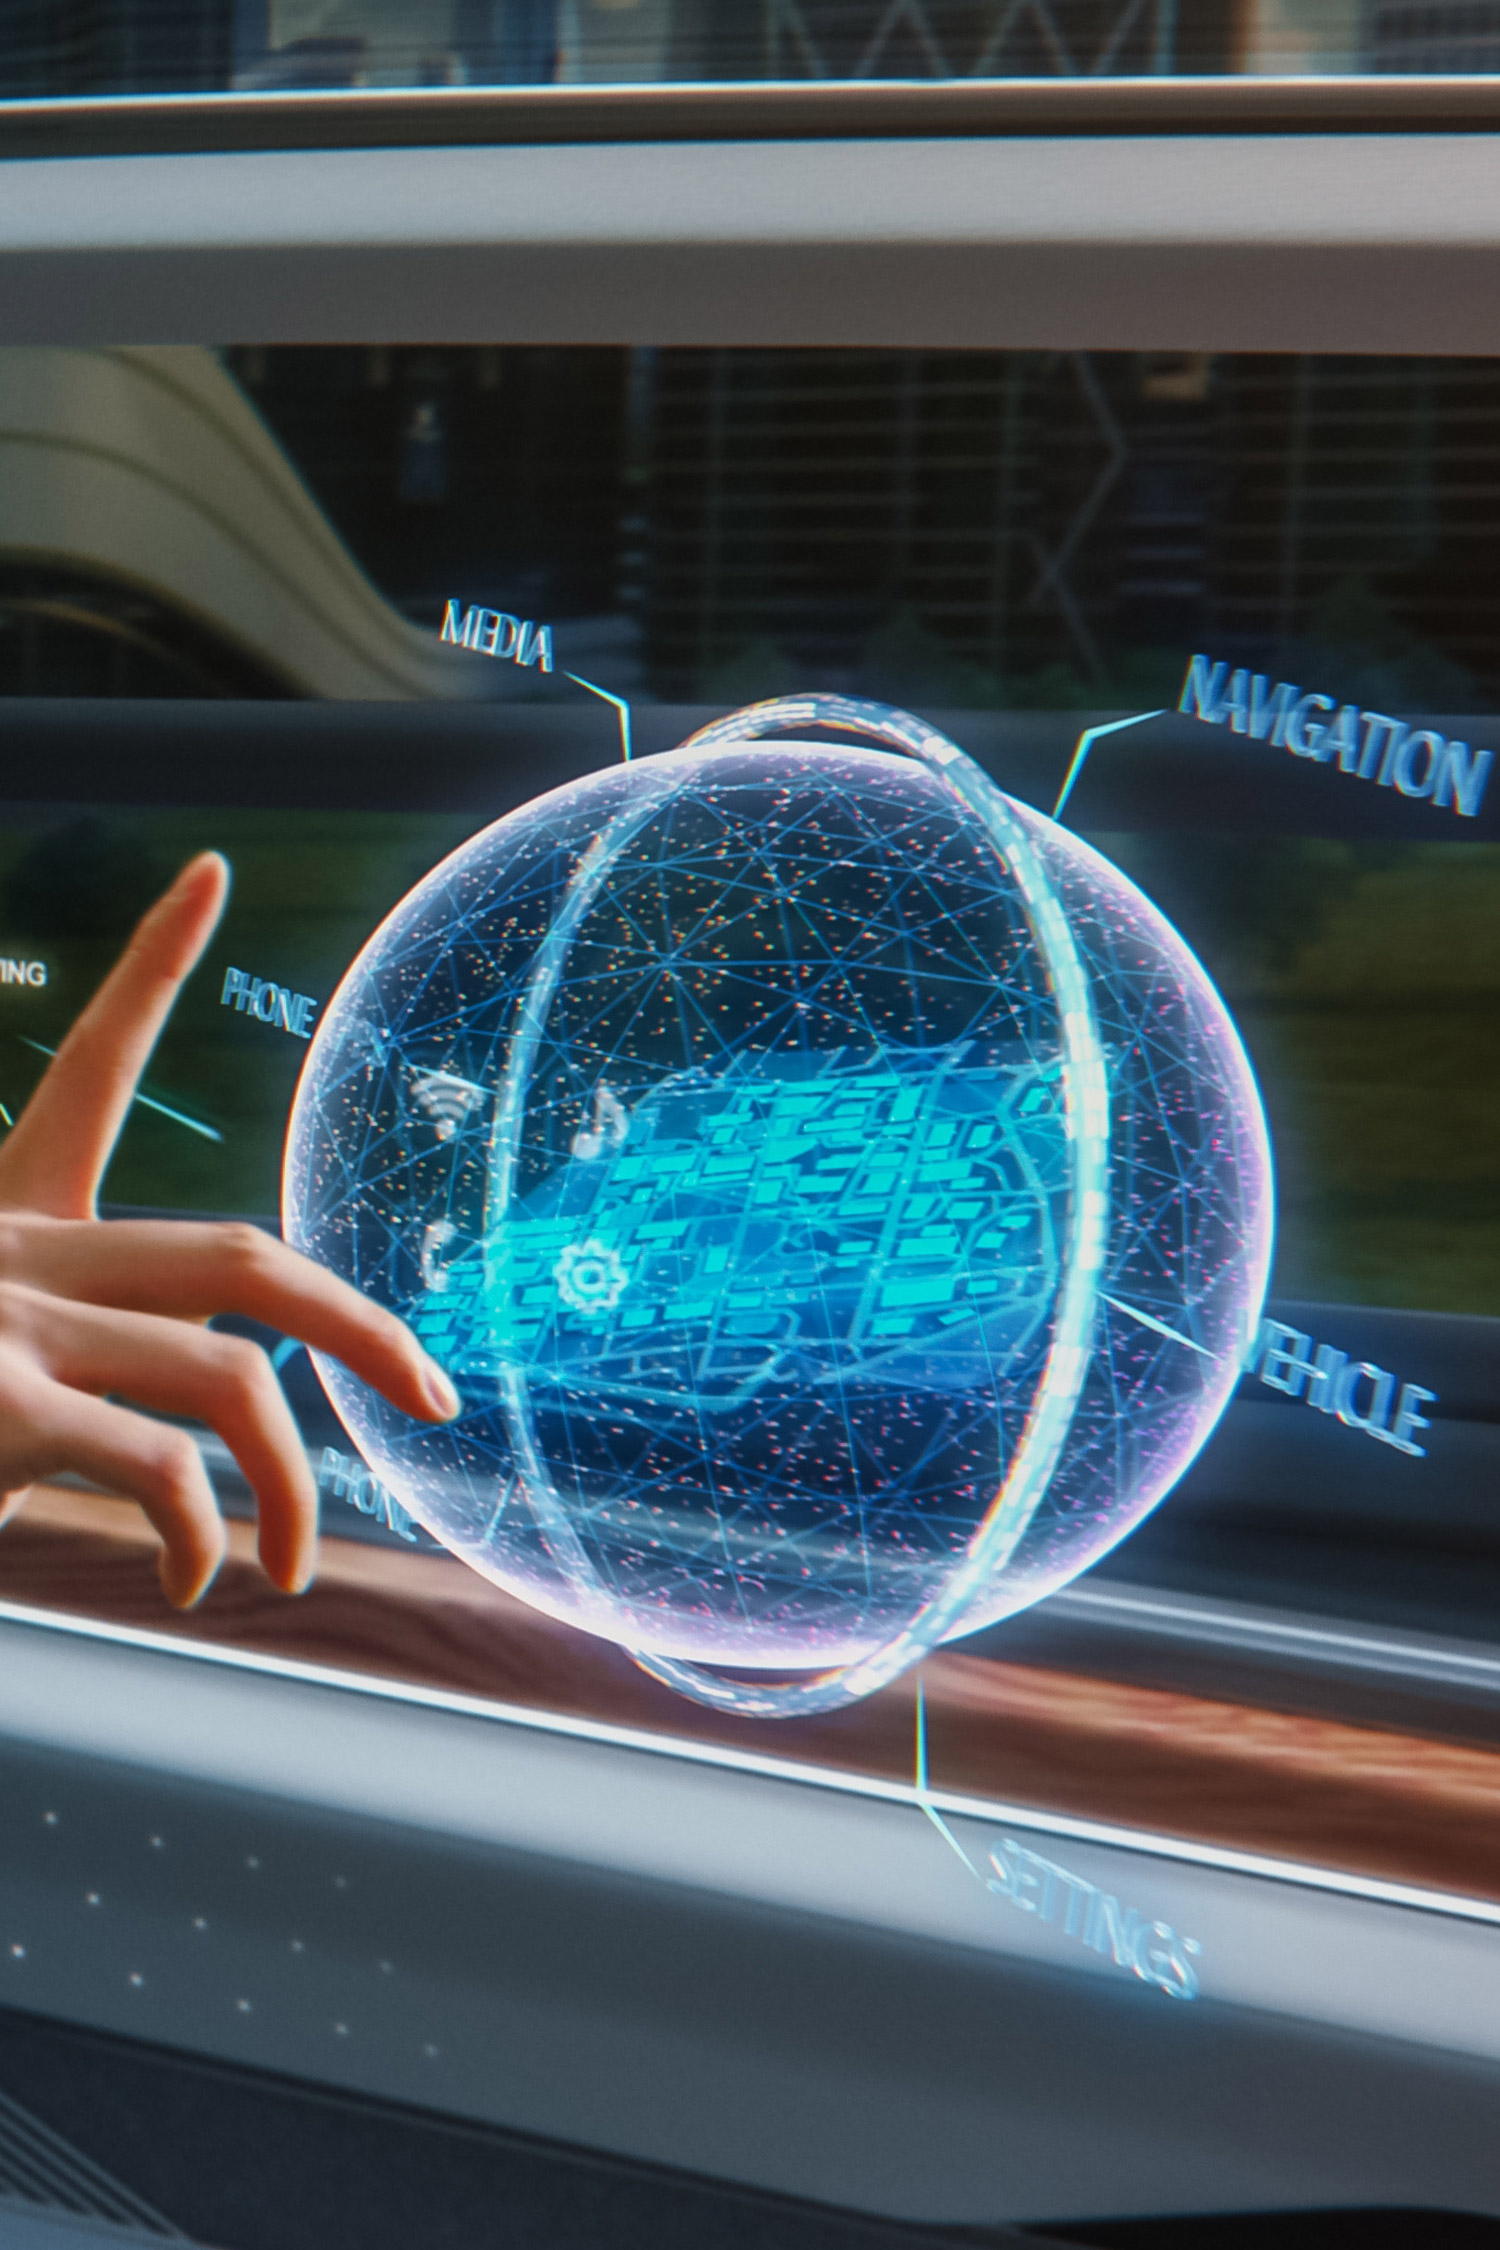 Passengers can enjoy entertainment on holographic displays of floating projection.